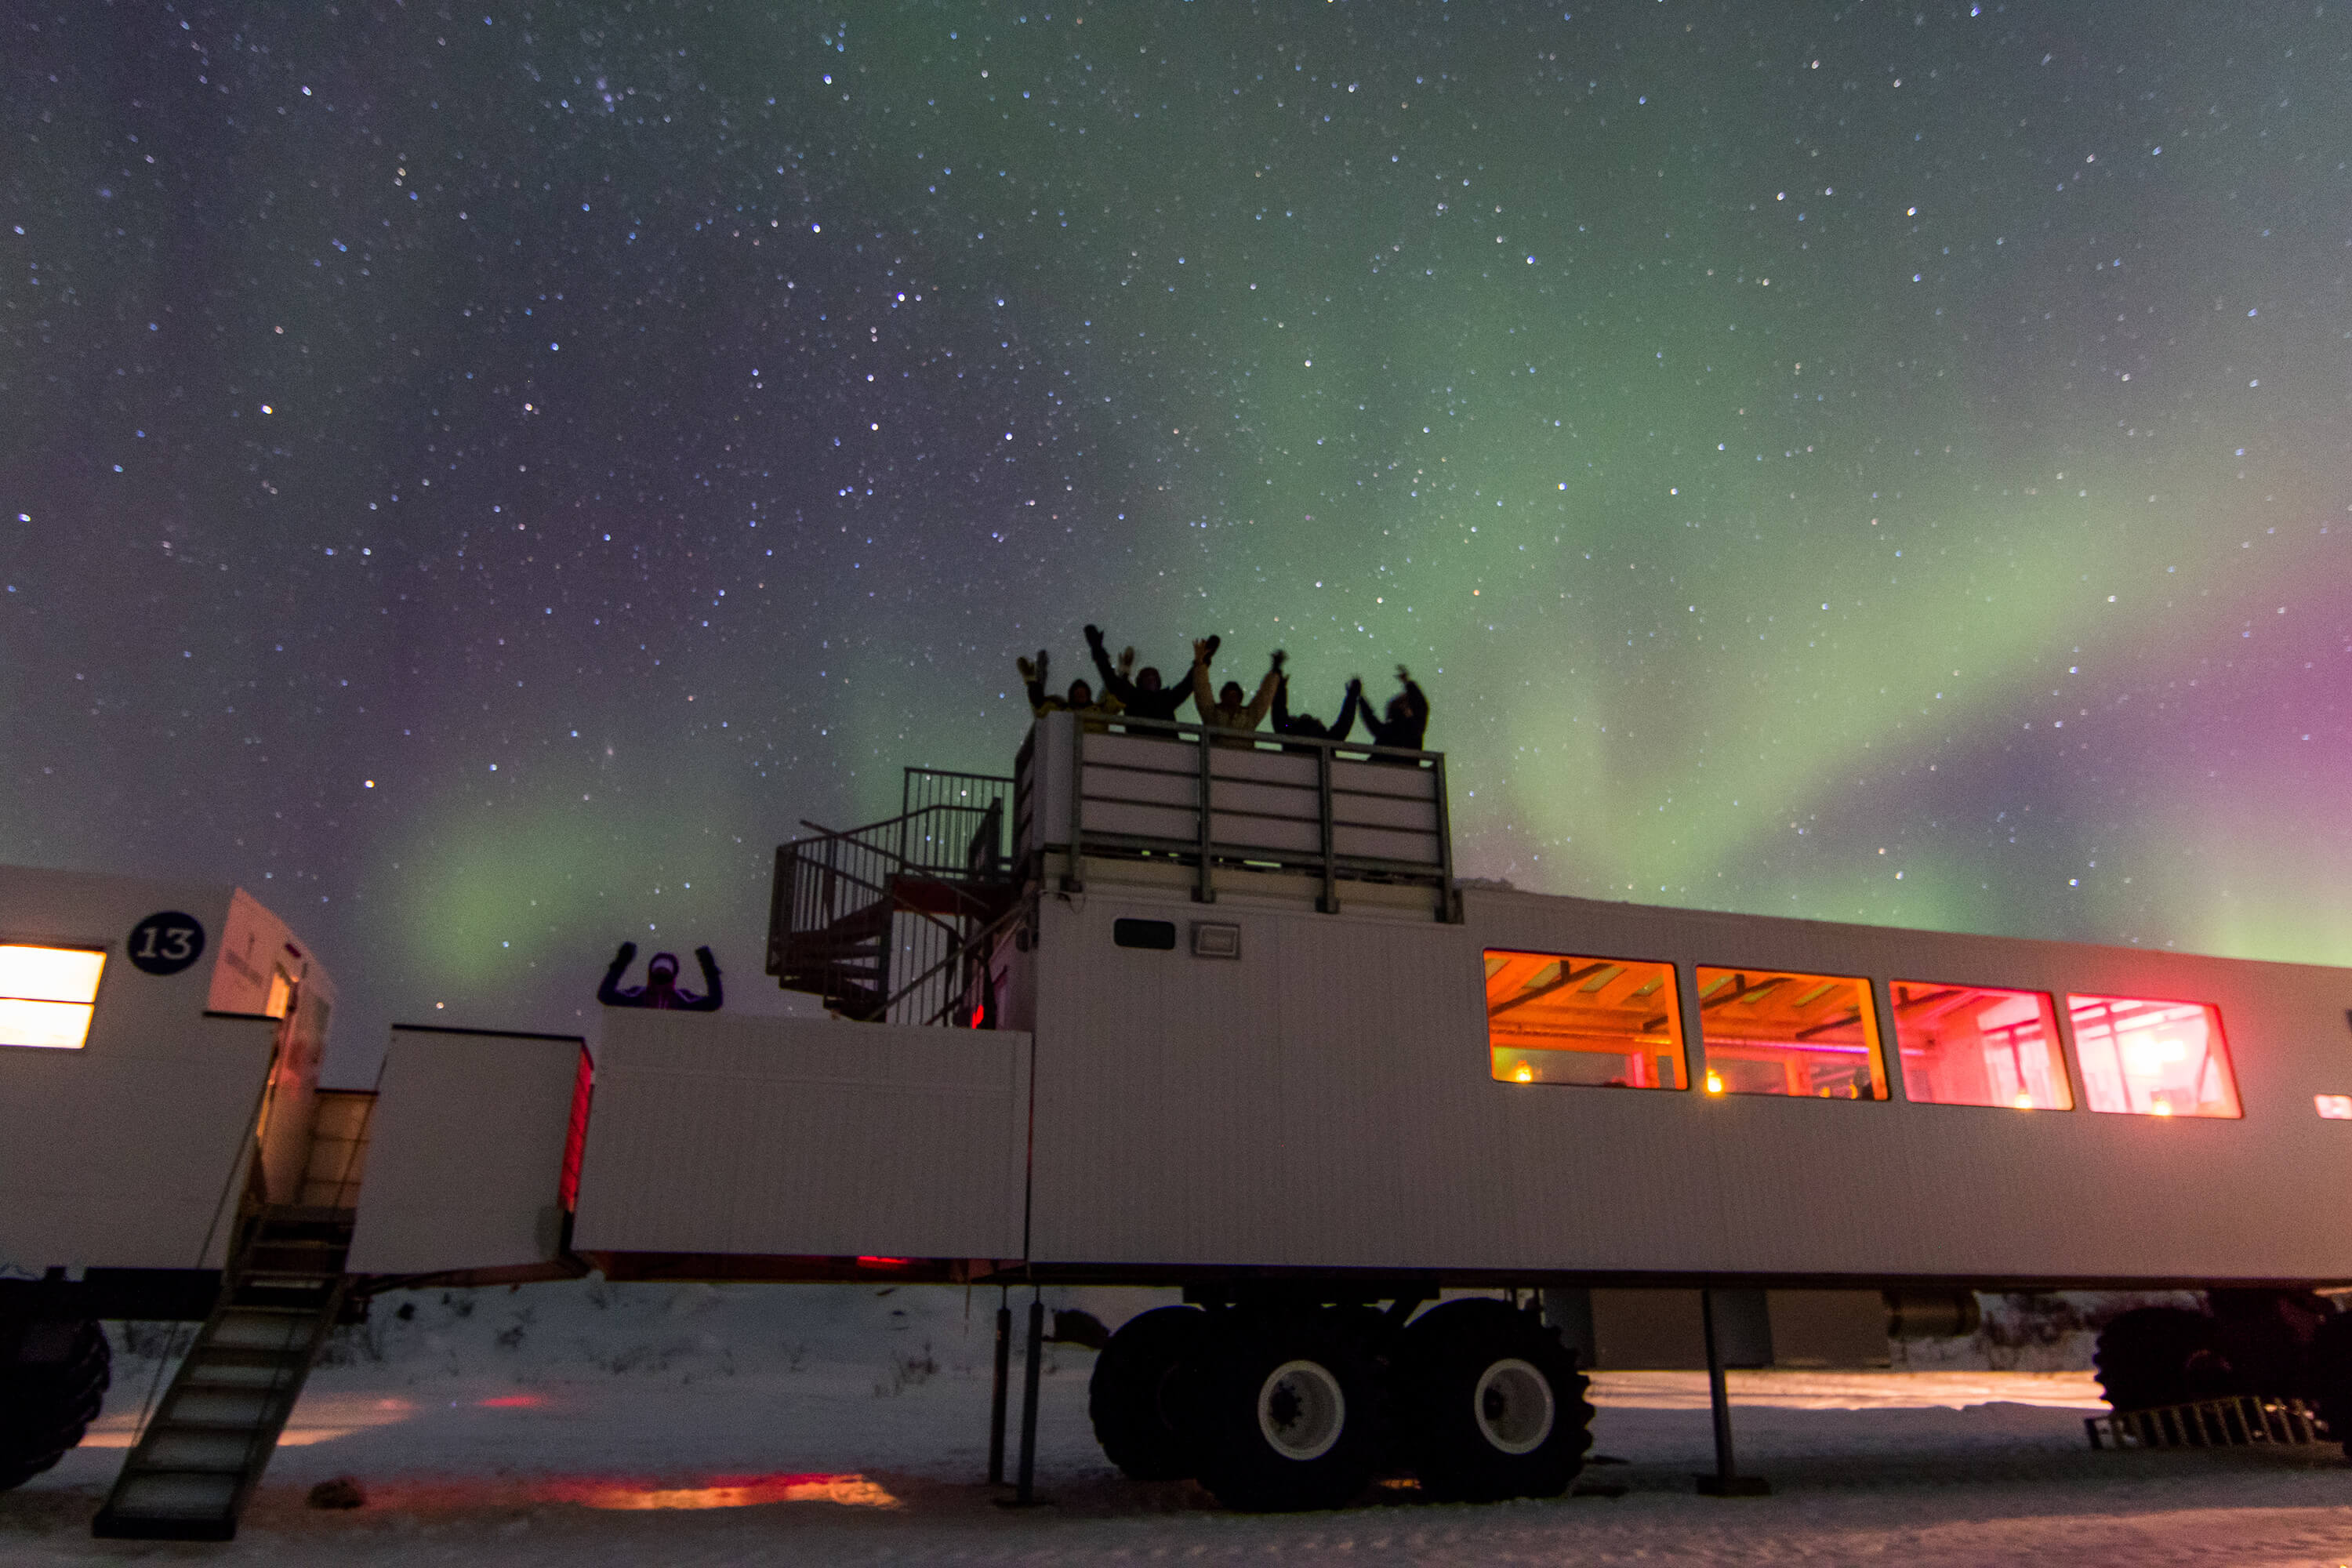 Guests beneath the northern lights on Thanadelthur Lounge's rooftop observation deck in Churchill, Canada.